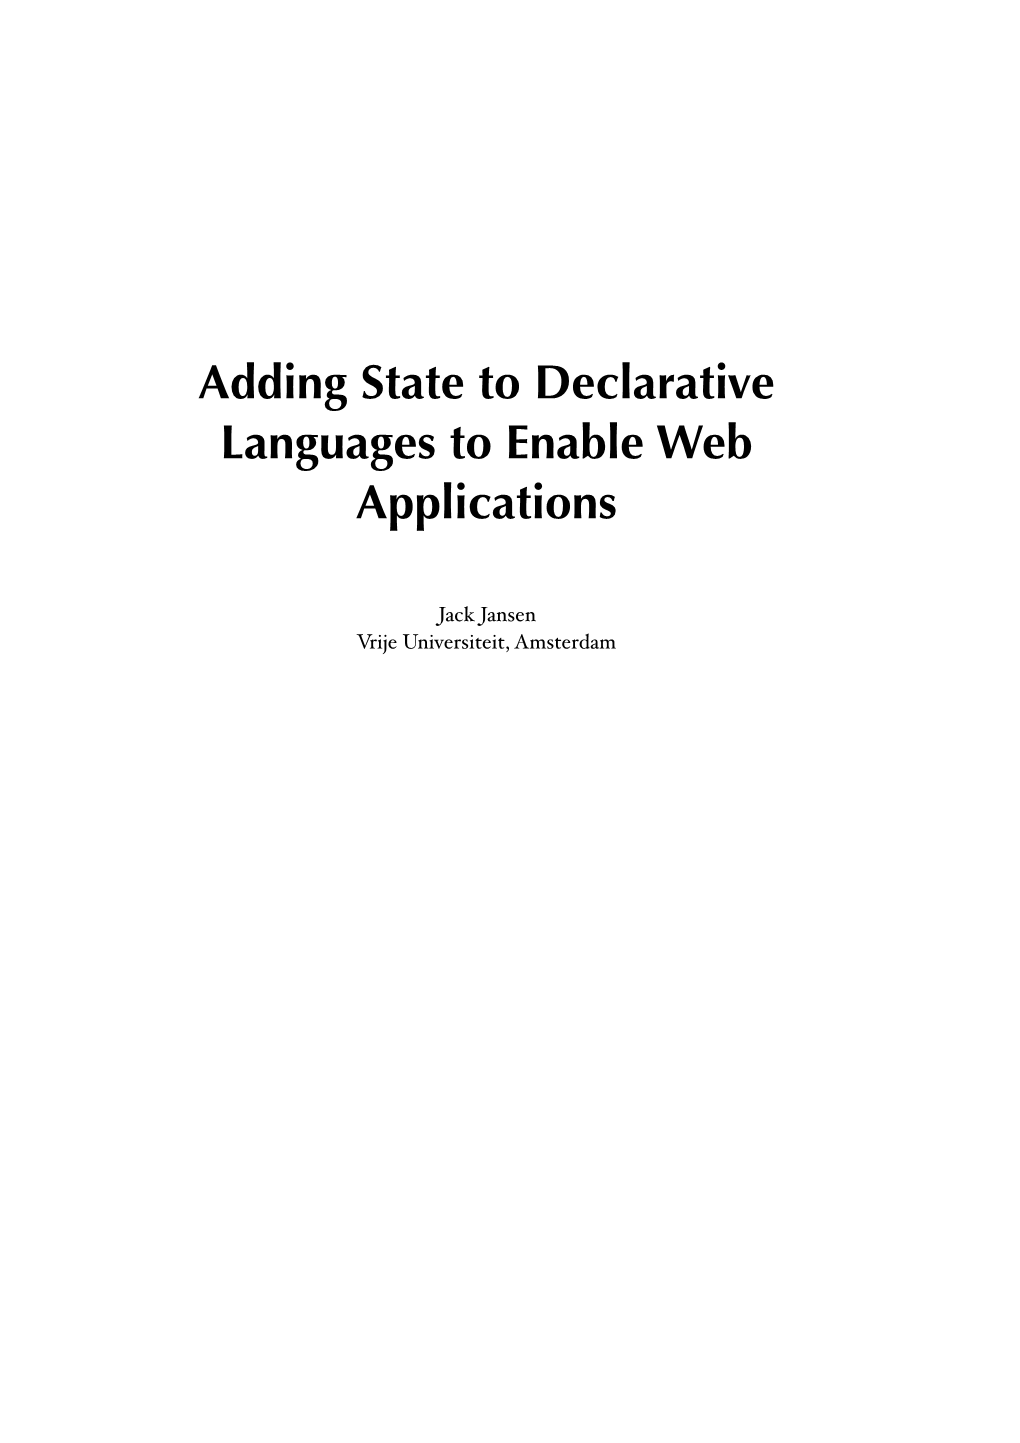 Adding State to Declarative Languages to Enable Web Applications